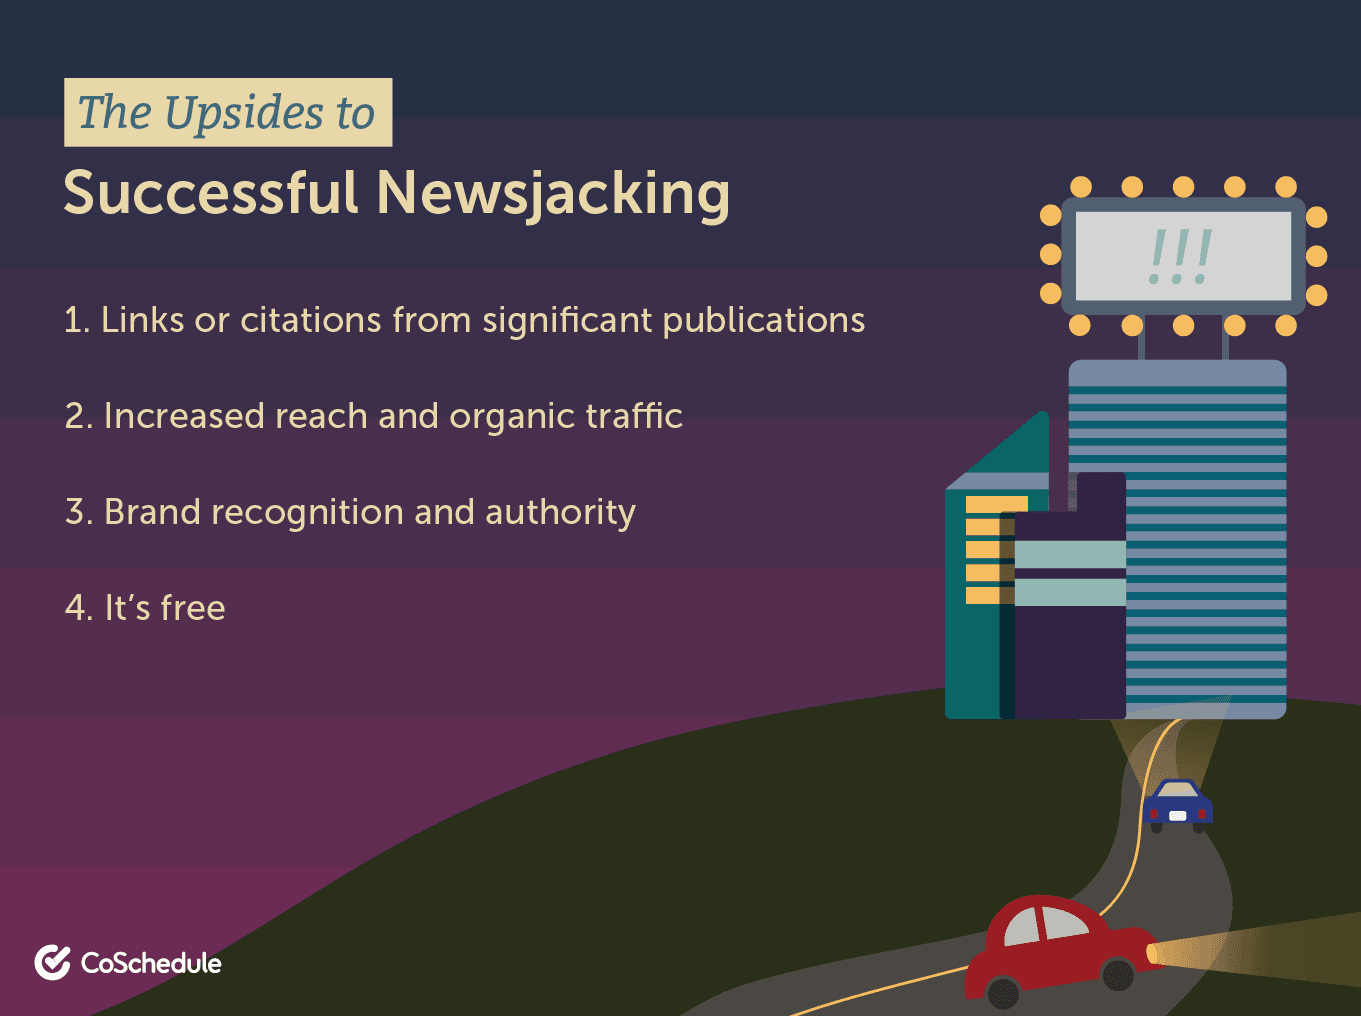 The upsides to successful newsjacking